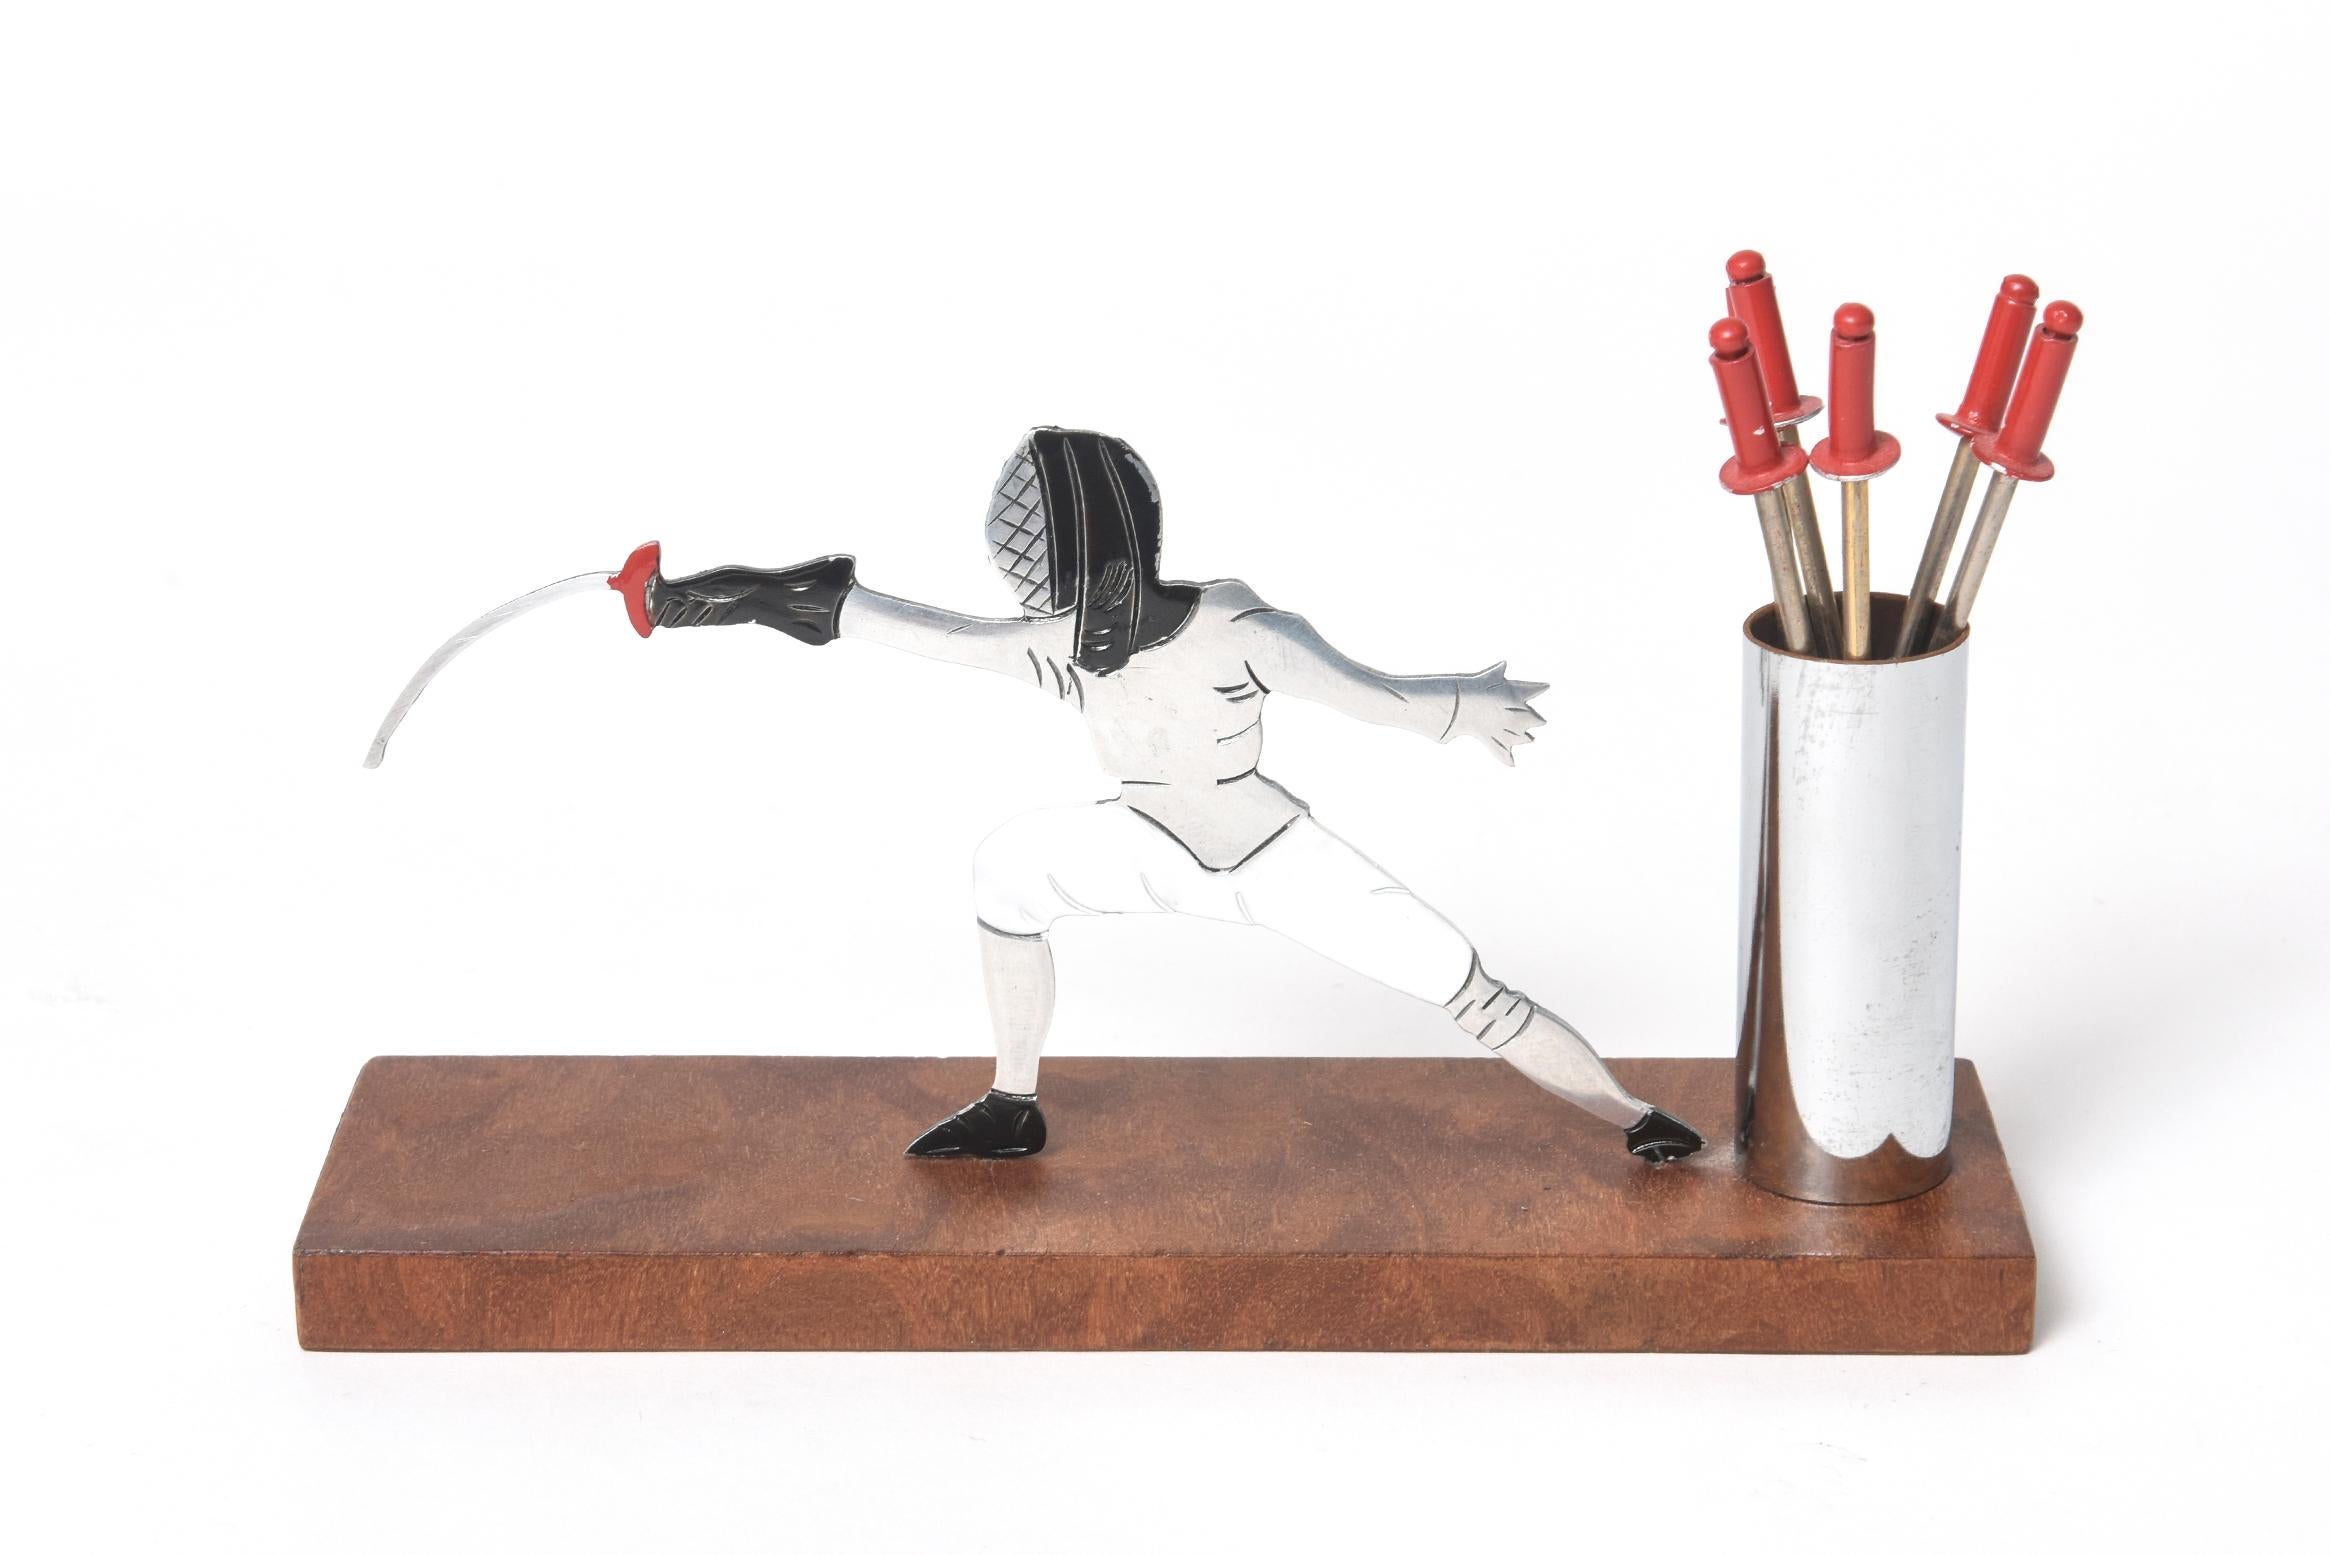 A French Art Deco chrome cocktail pick set featuring a fencer lunging with his sword in hand. The six epee sword picks fan out in a chrome cylinder stand. The picks have painted red finials. These cocktail pick holders (